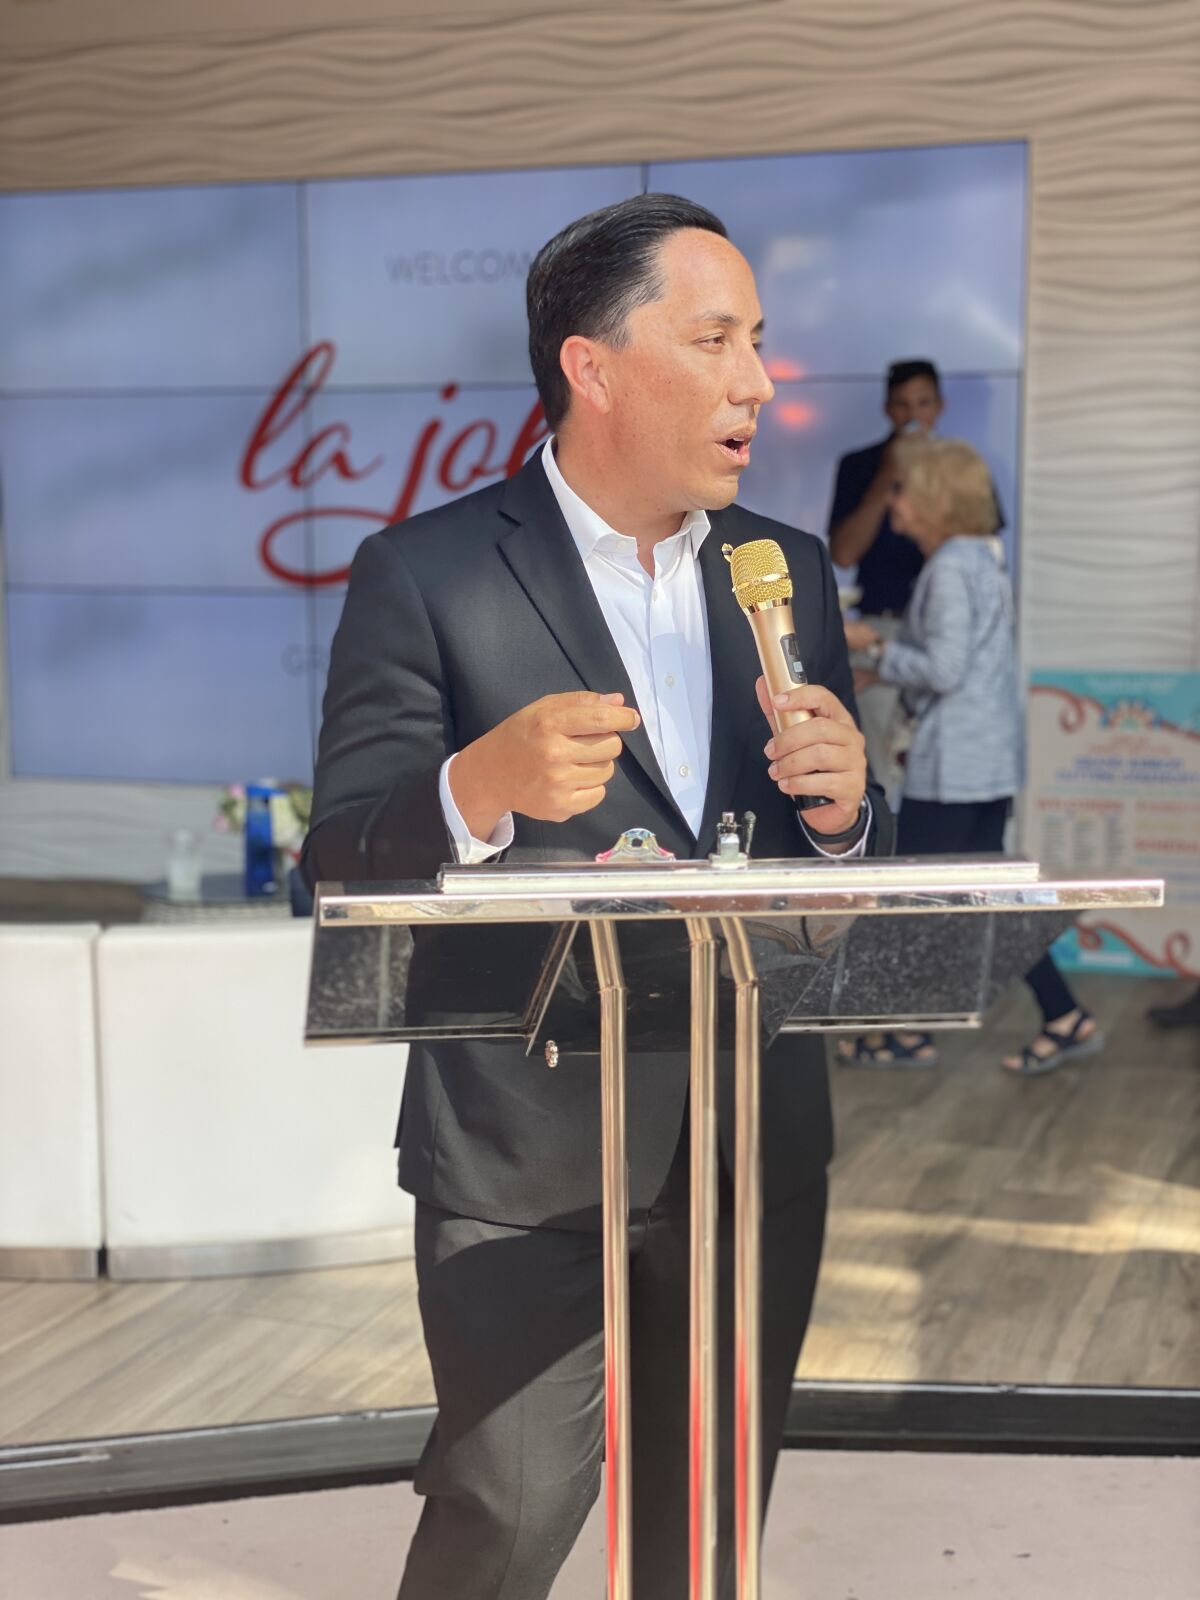 San Diego Mayor Todd Gloria said "our small local businesses … need us more than ever."